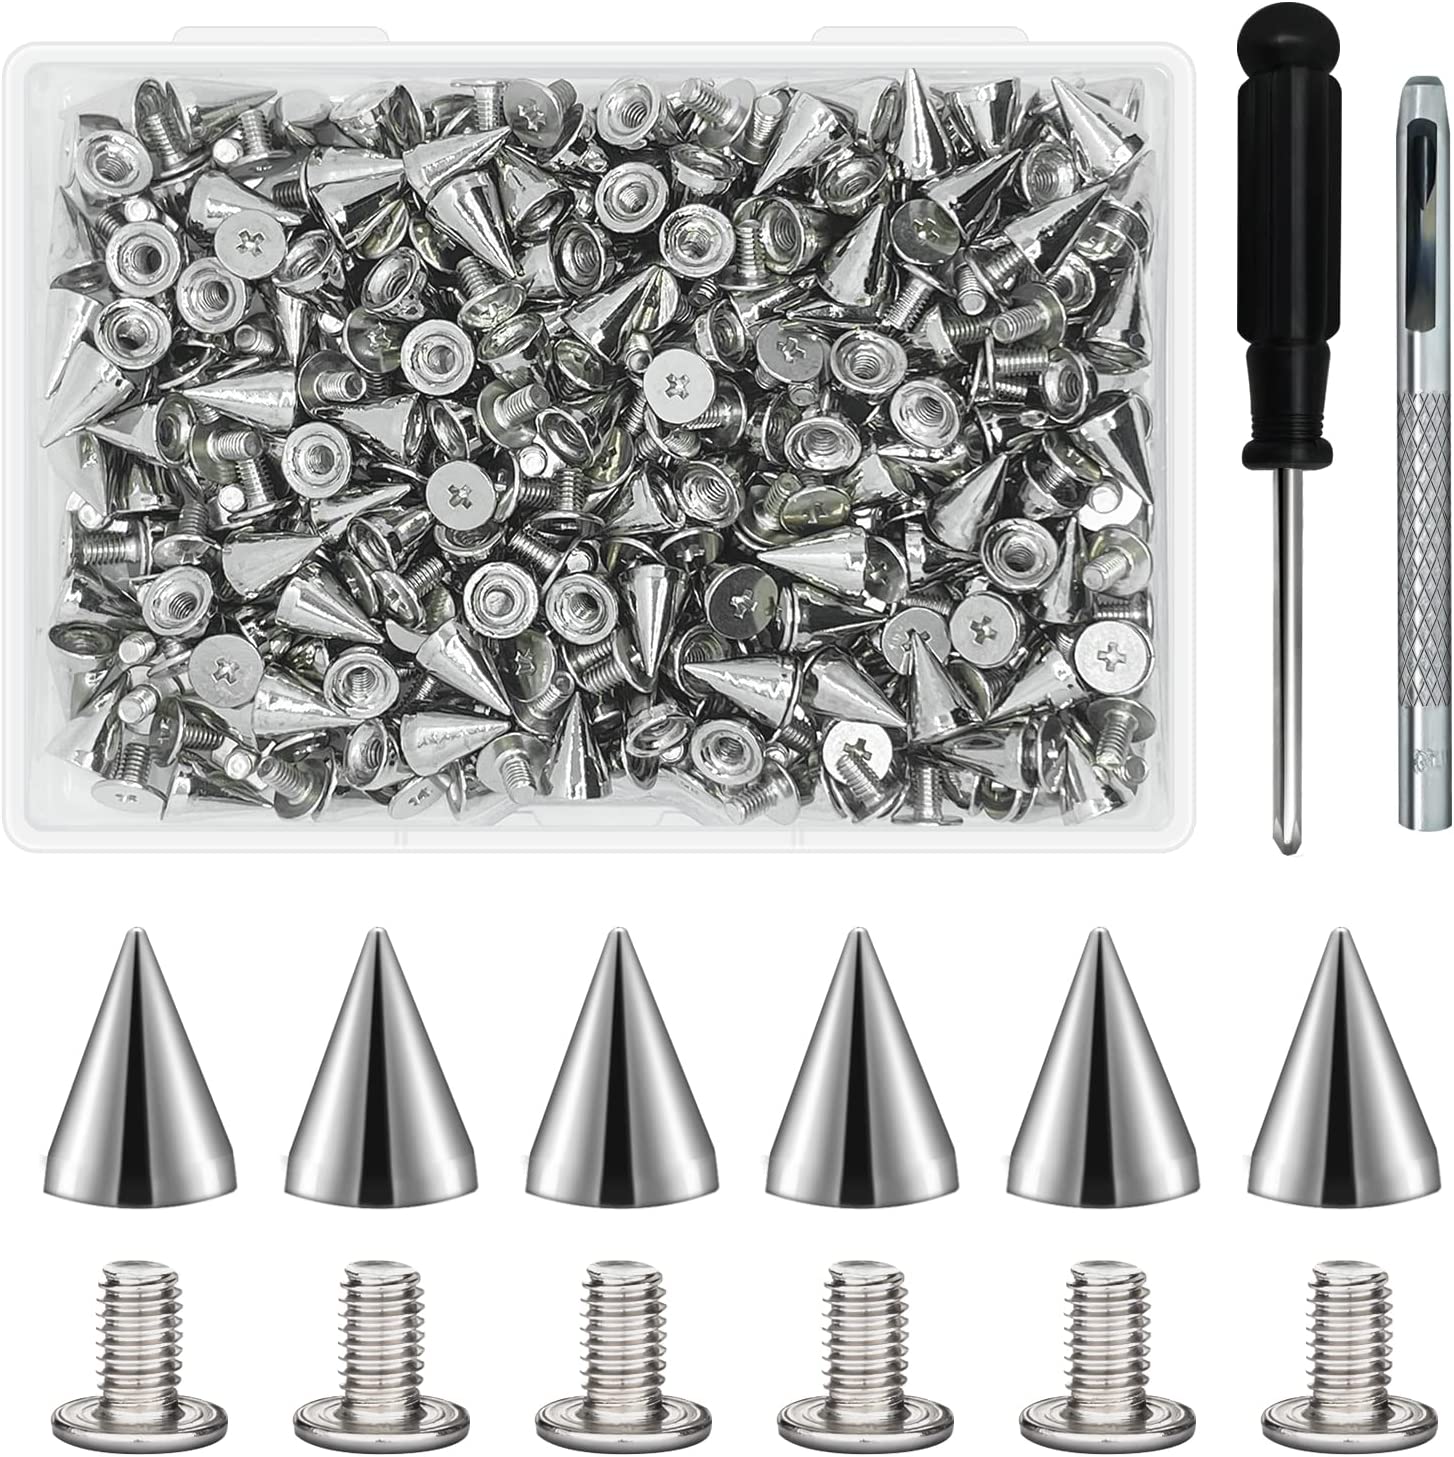 HAPY SHOP 200 Sets Cone Spikes and Studs Silver Screwback Studs Rivets  Metal Tree Spikes Studs Punk Spikes for Leather Craft Clothing Shoes